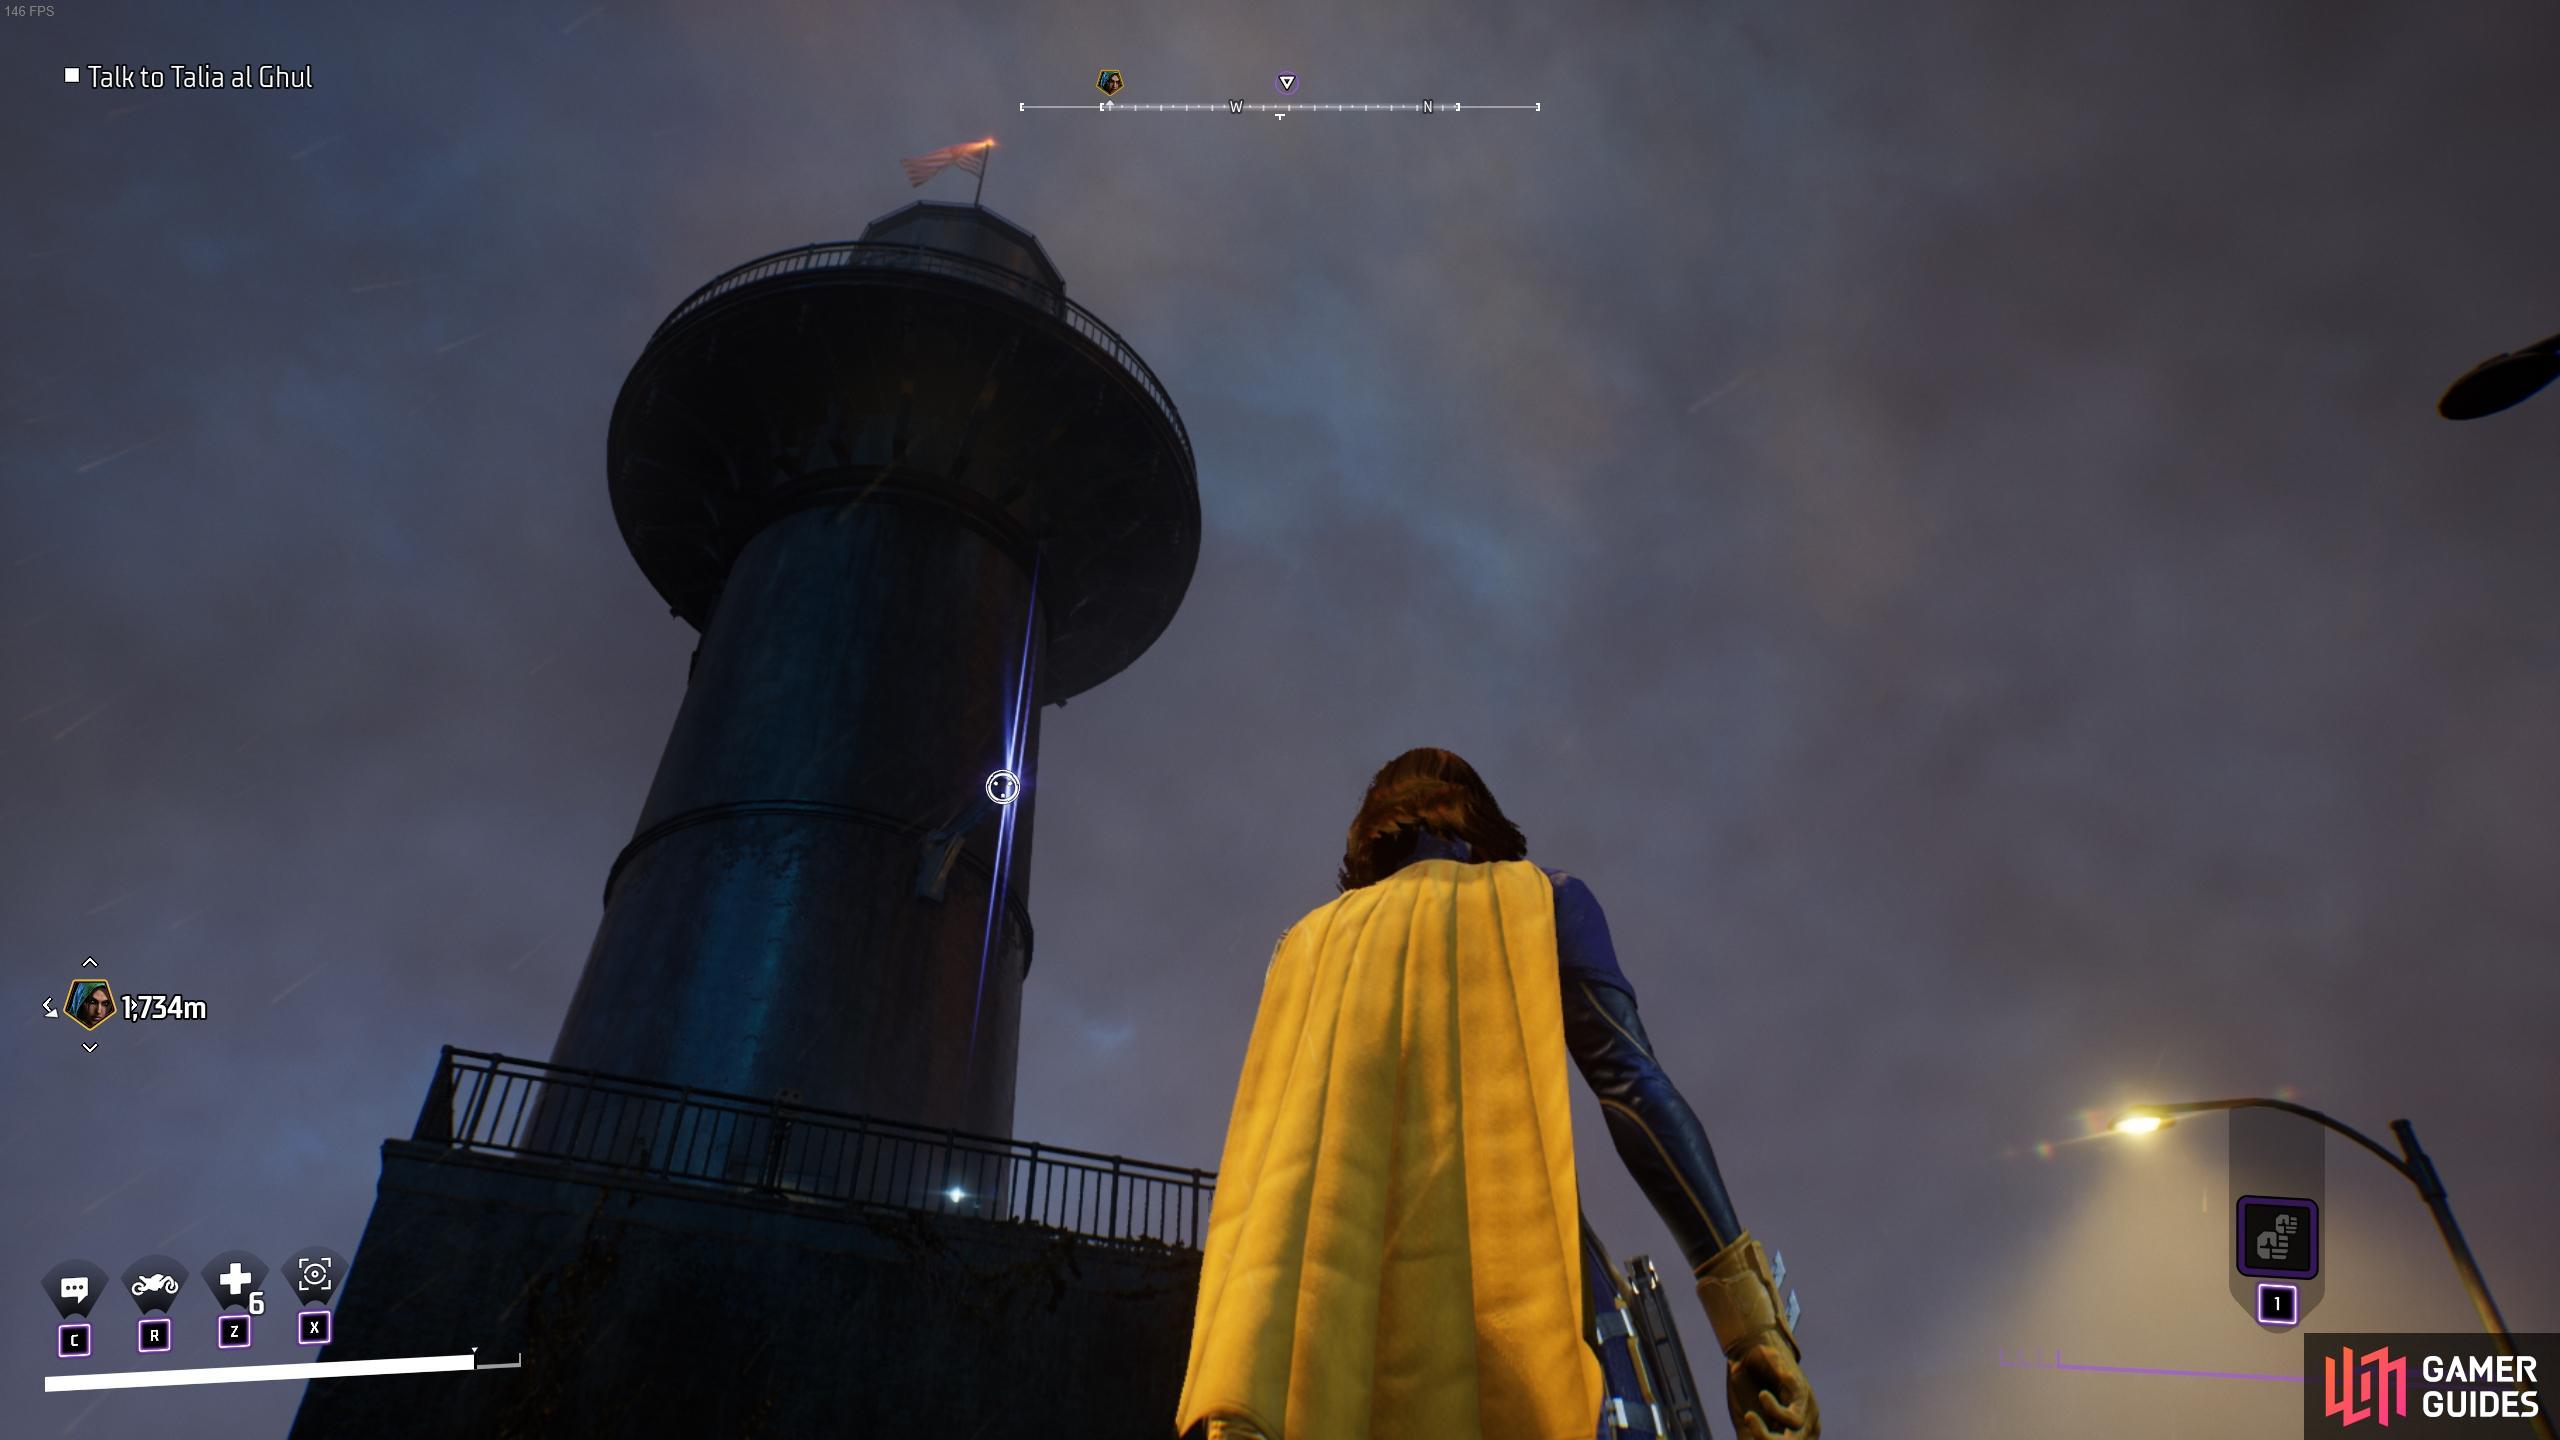 All you need to do for this one is grapple to the side of the lighthouse to obtain the Batarang.